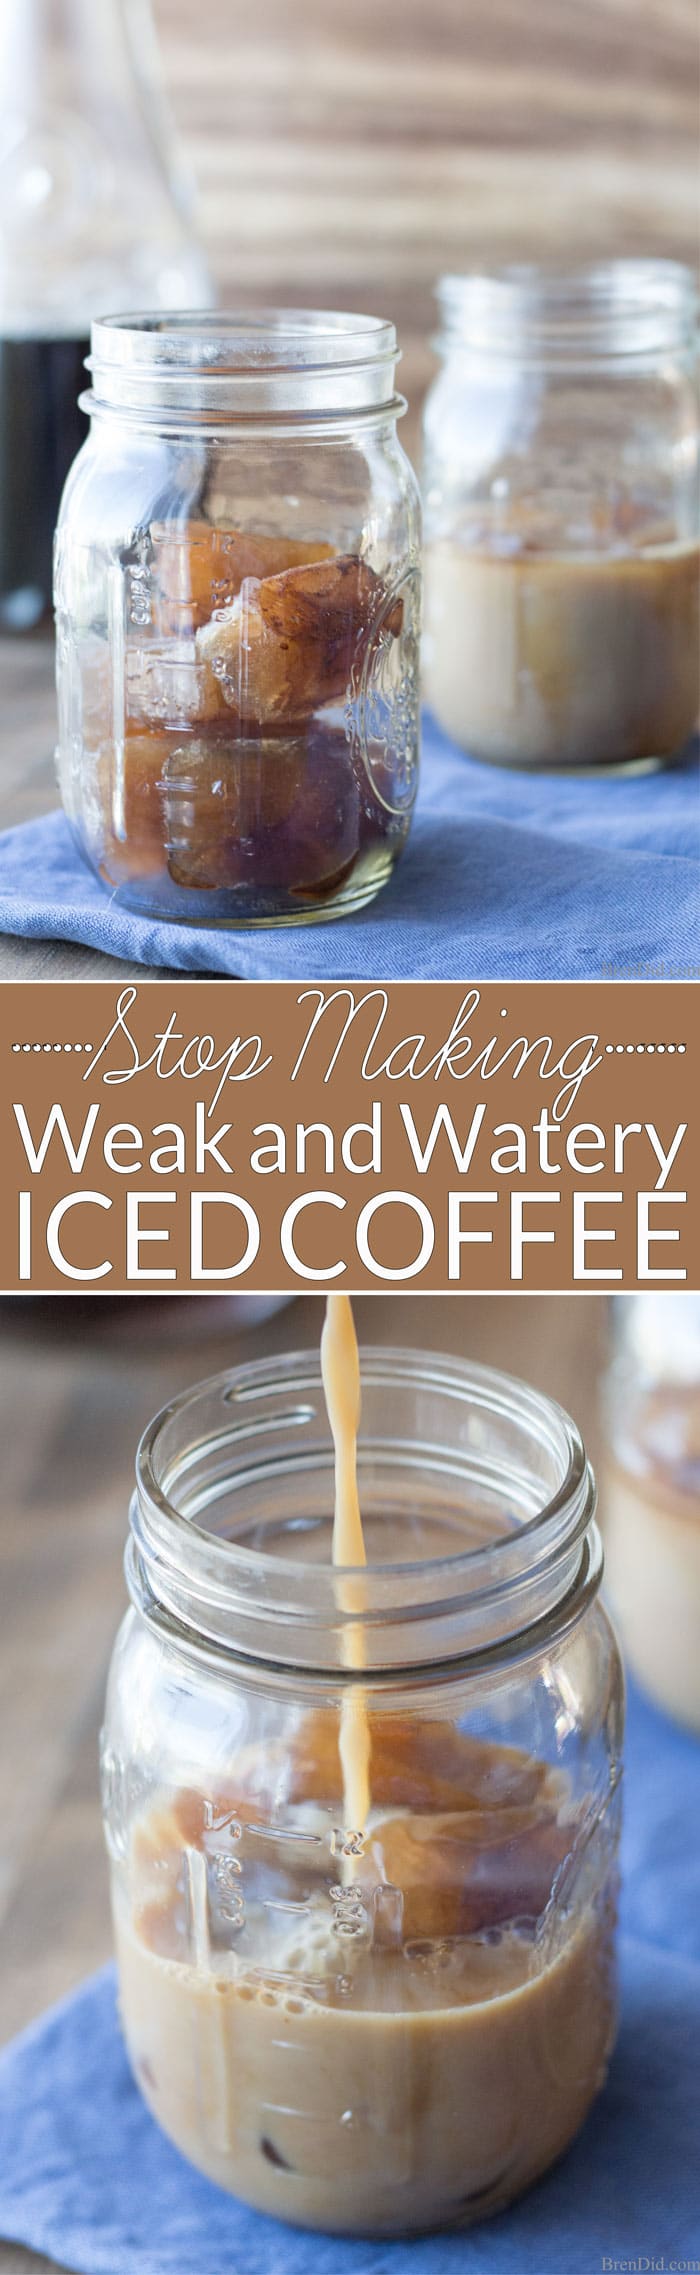 https://brendid.com/wp-content/uploads/2016/05/How-to-Make-Iced-Coffee-That-Wont-Get-Weak-and-Watery-Pin.jpg